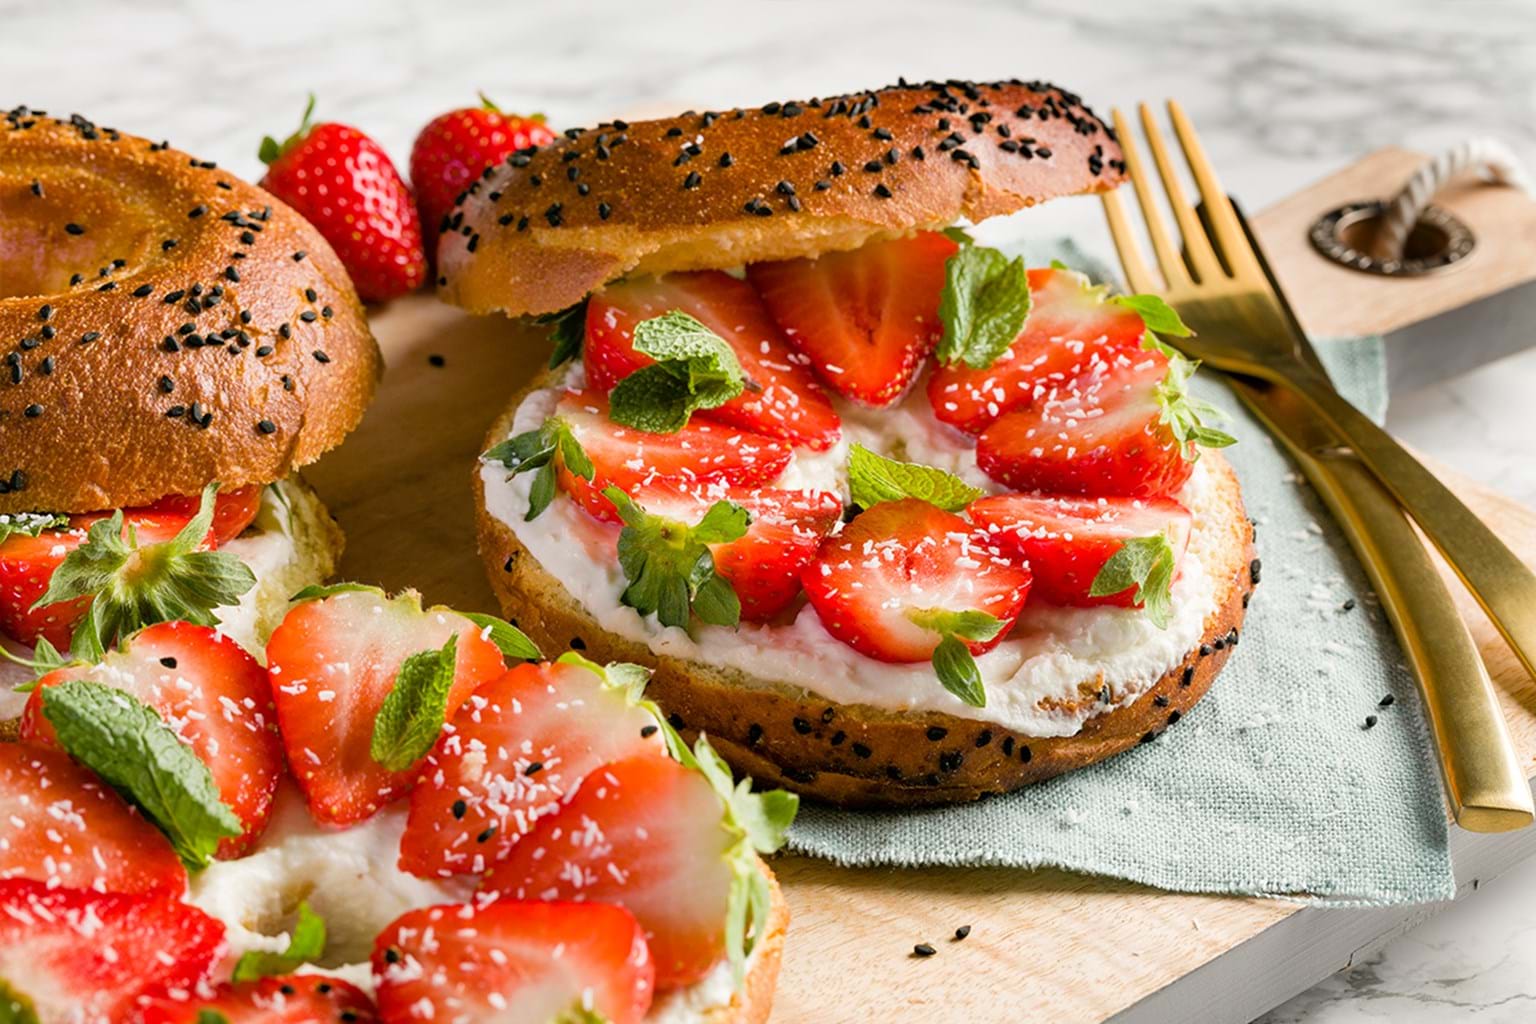 Bagel with ricotta and strawberries - EAT ME